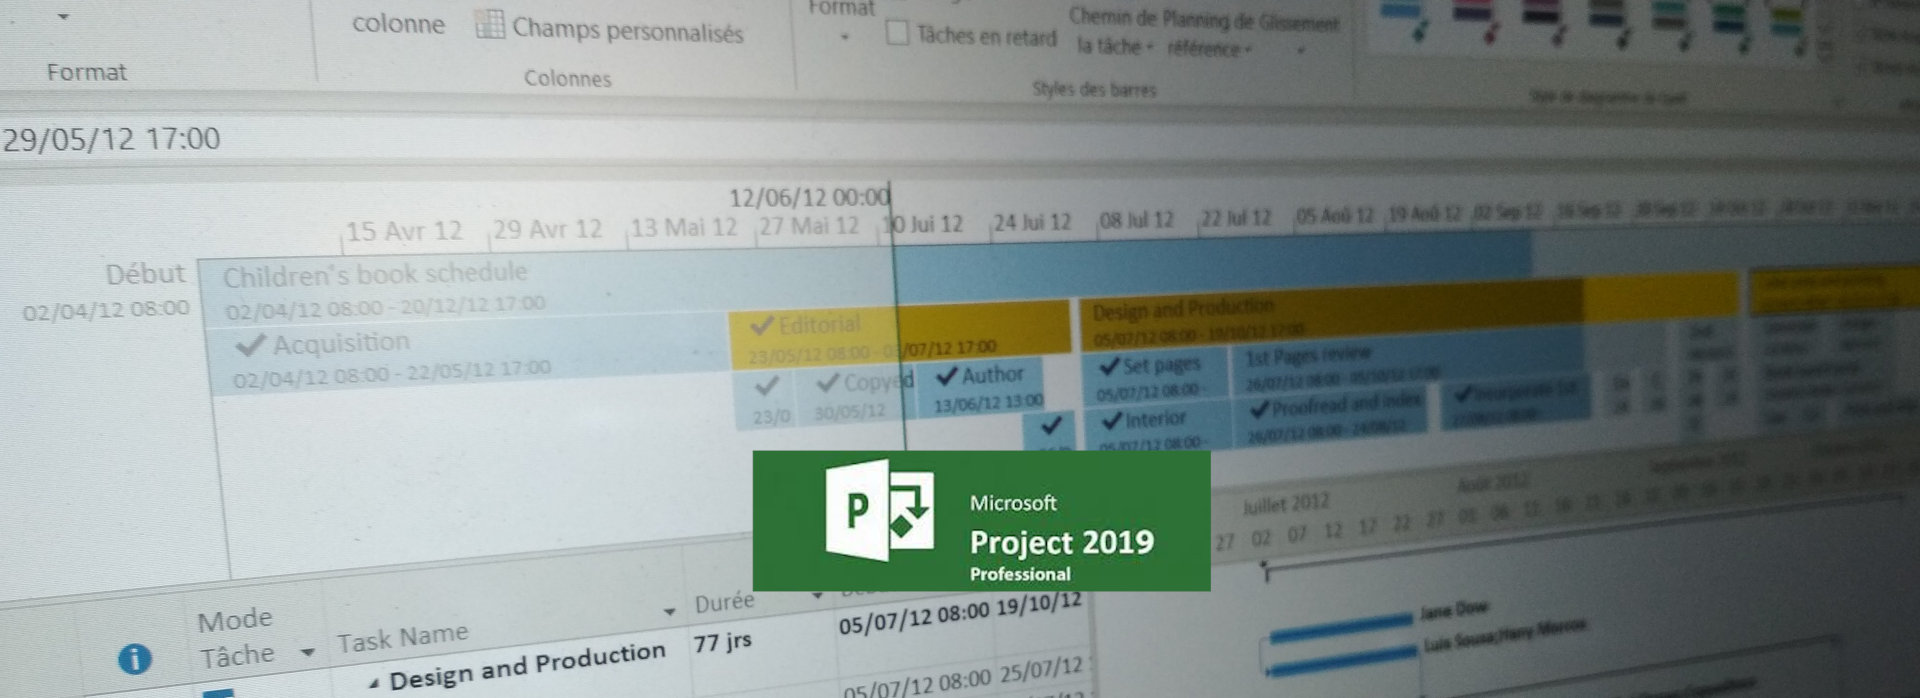 Live online Microsoft Project training in french